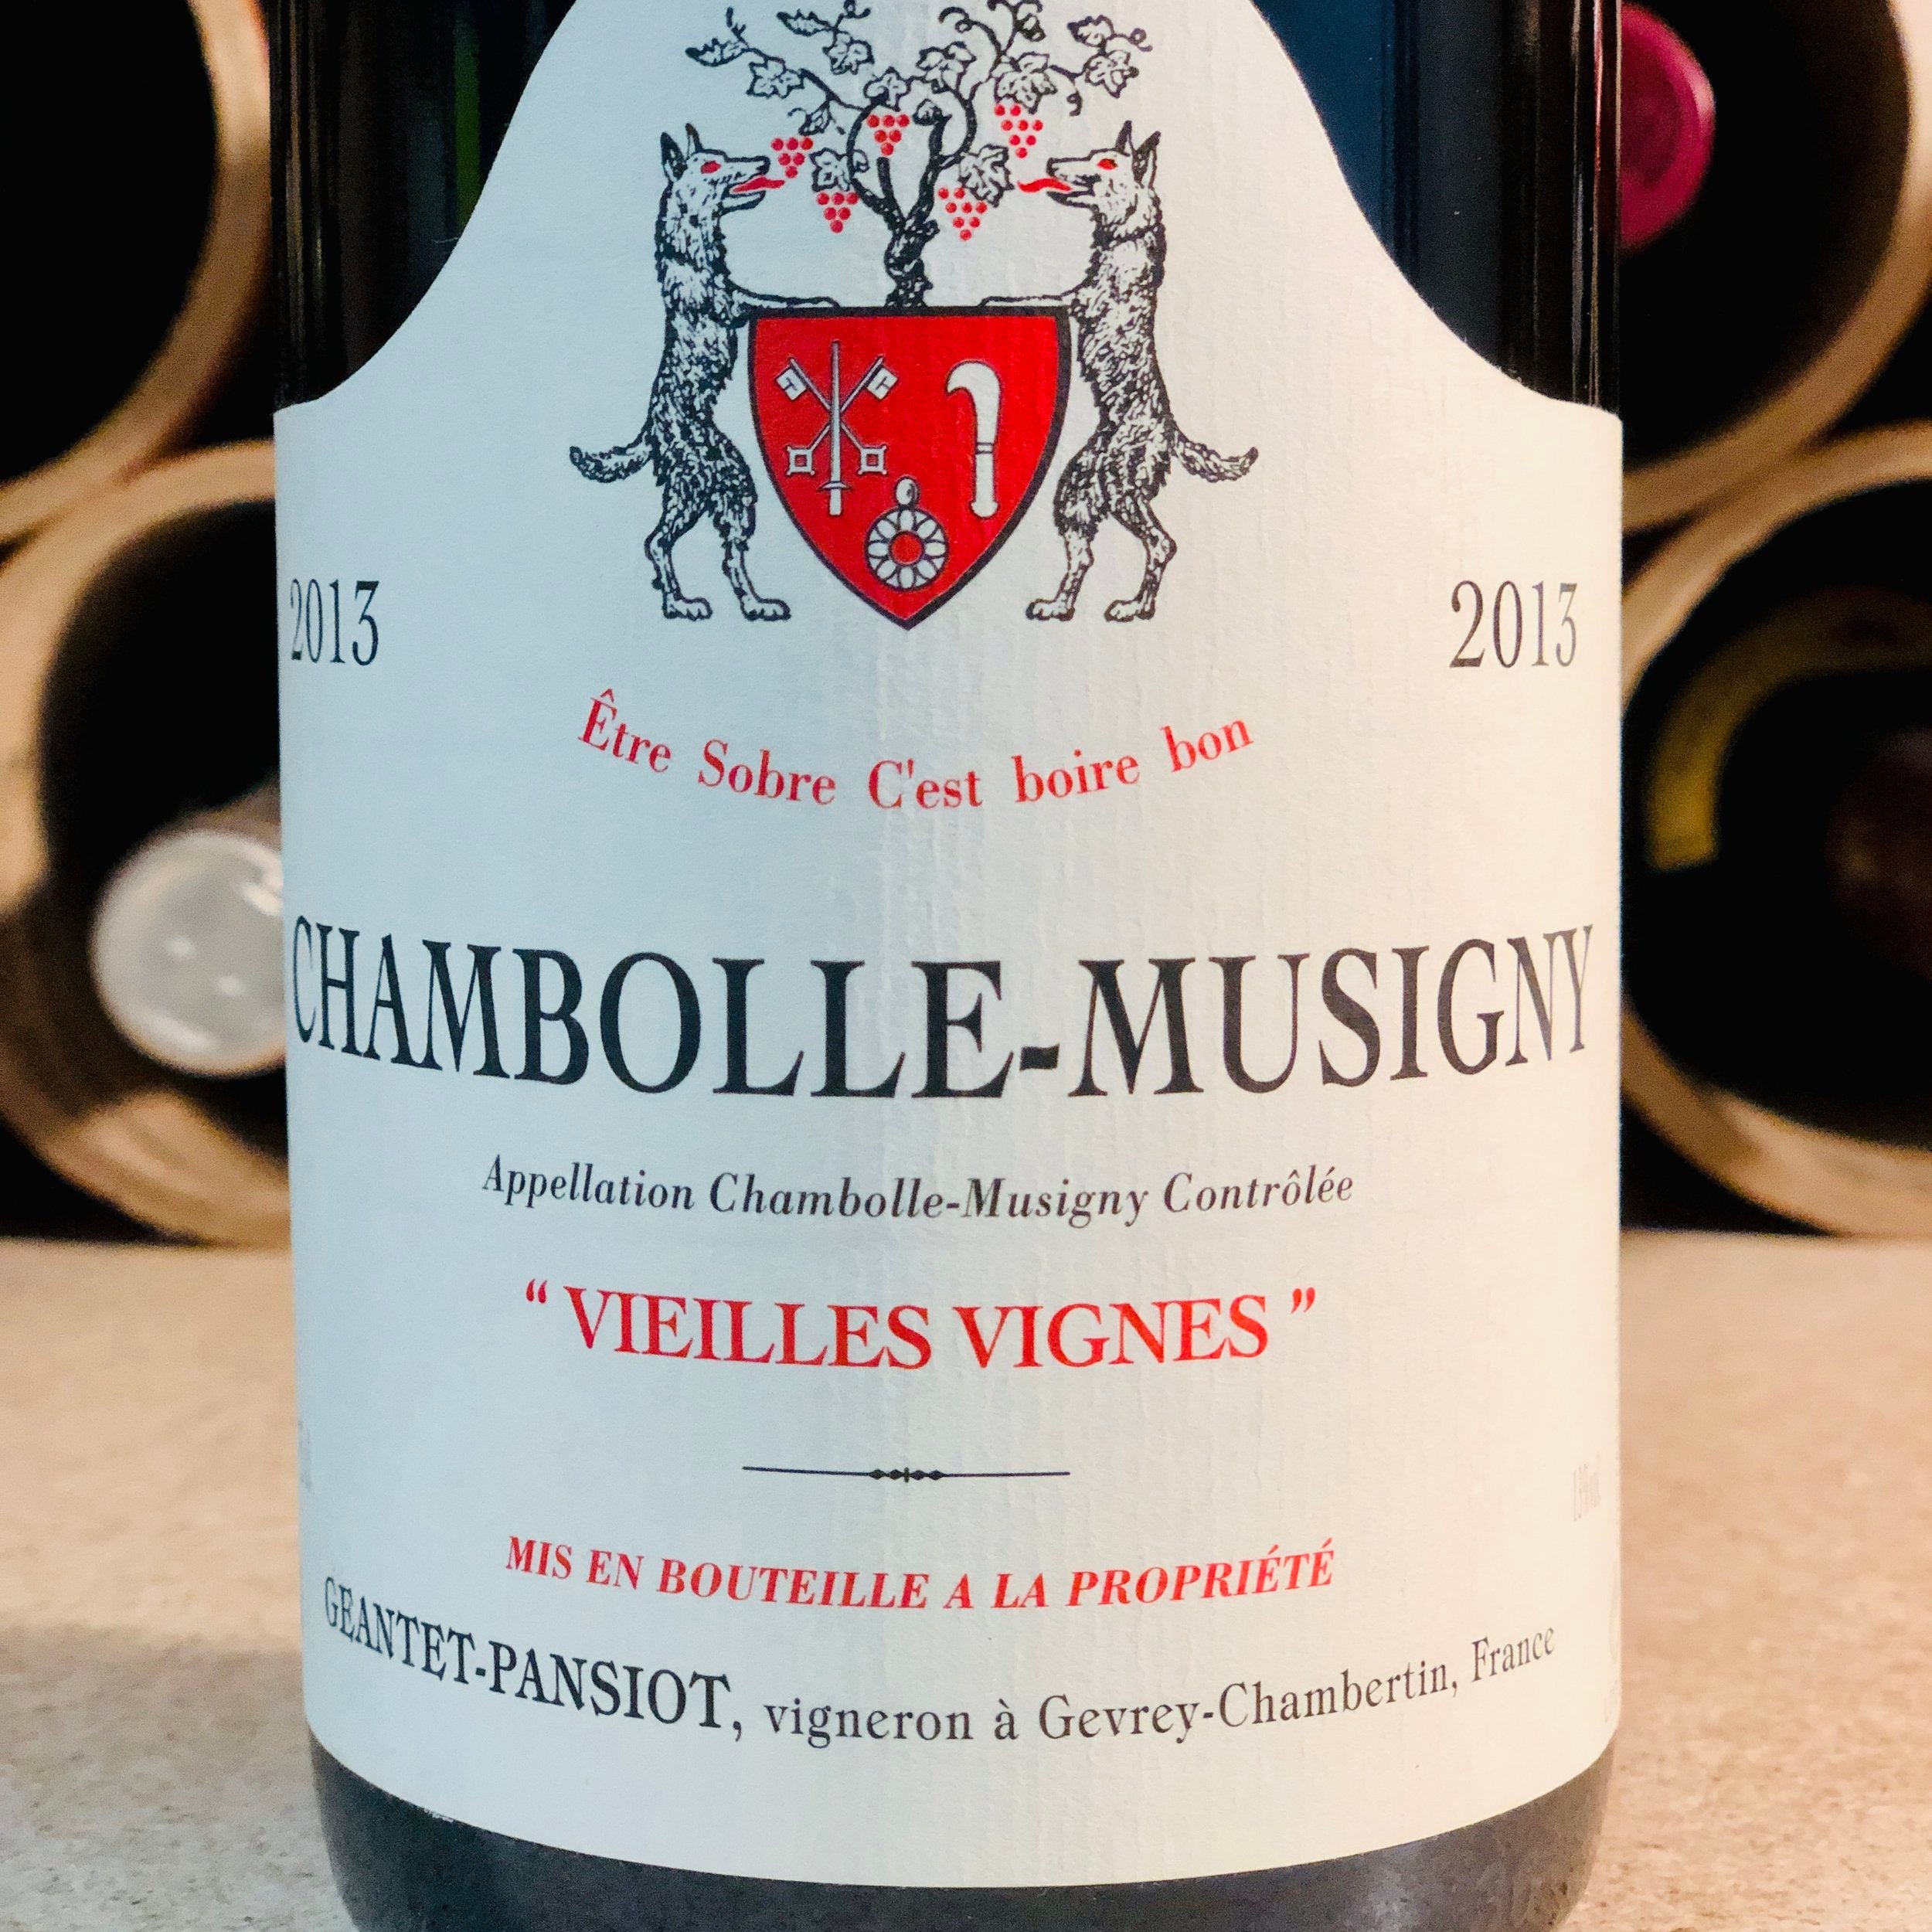 Geantet-Pansiot, Chambolle Musigny, Vieilles Vignes 2013